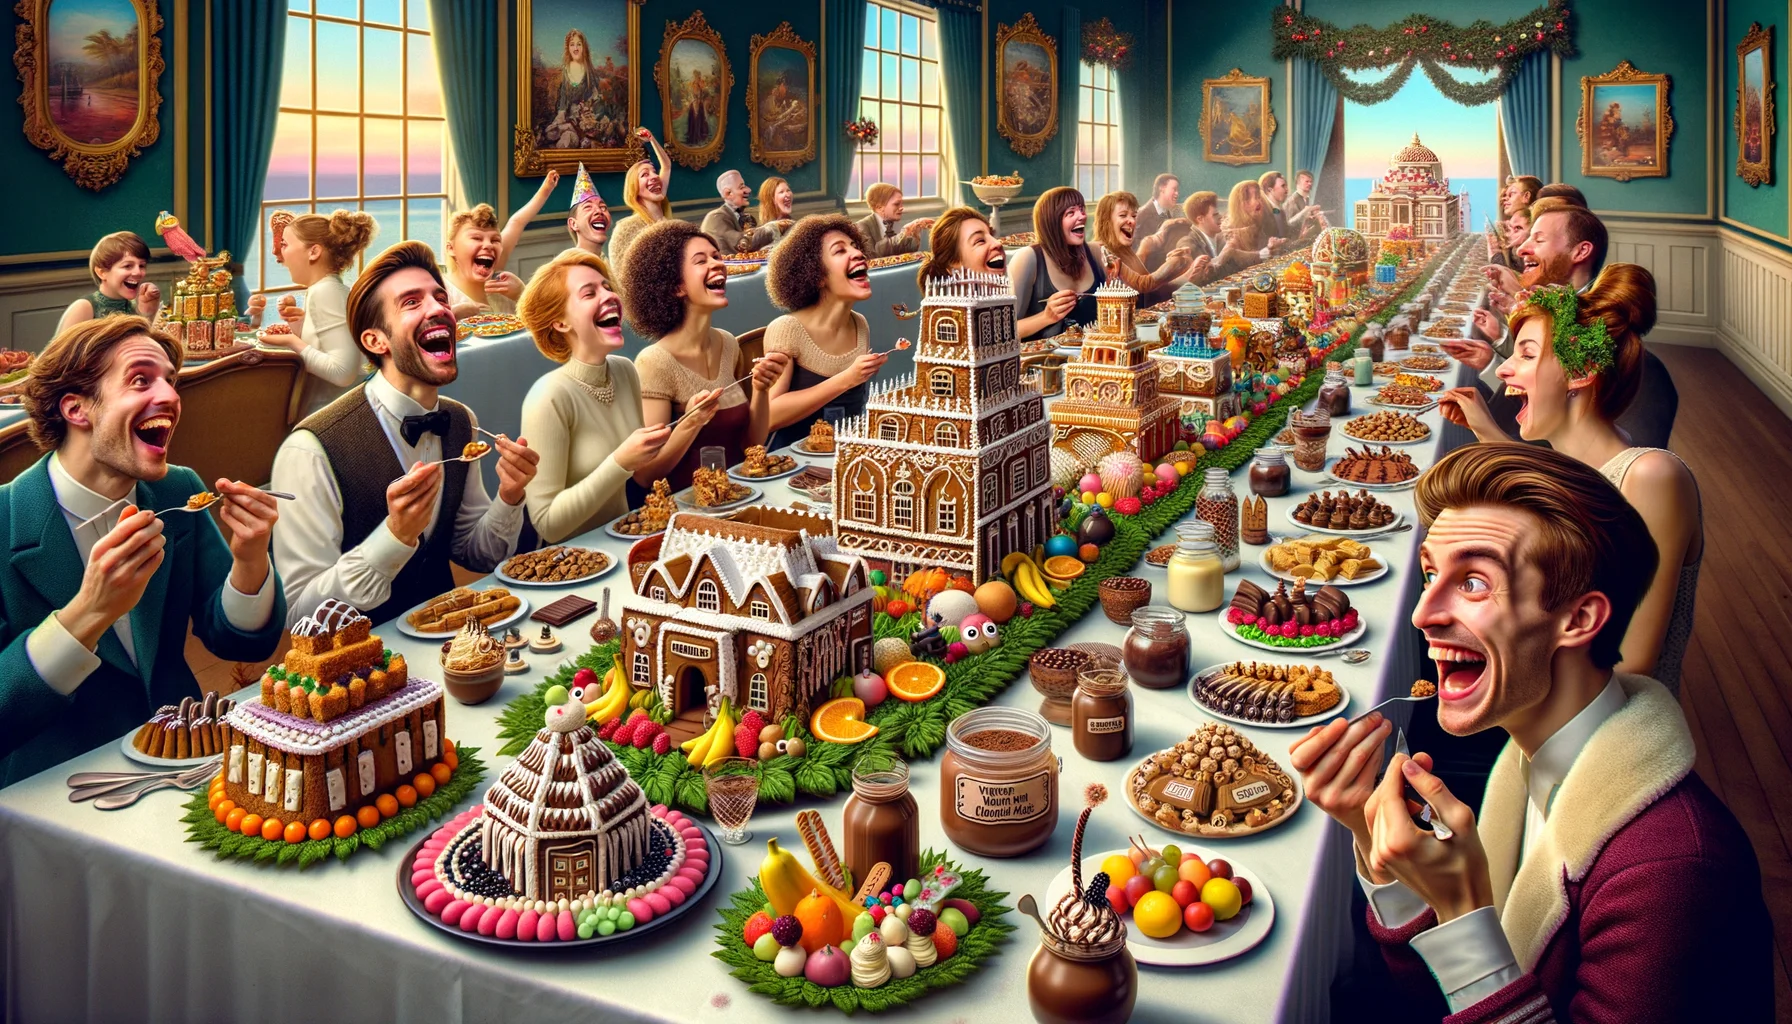 Create a funny, realistic image showcasing a party scene where the decorations are all visually enticing and edible, specifically designed for different dietary restrictions. Picture a long buffet table filled with creatively crafted decorations like gluten-free gingerbread houses, vegan friendly fruit art, lactose-free chocolate sculptures, and more. The room is filled with people of various genders and ethnicities, all laughing cheerfully while enjoying the food and admiring the unique edible decor. The table, the food containers, and the colorful decorations are all made in a style reminiscent of the rococo period, giving a lavish yet elegant charm to the scenario.